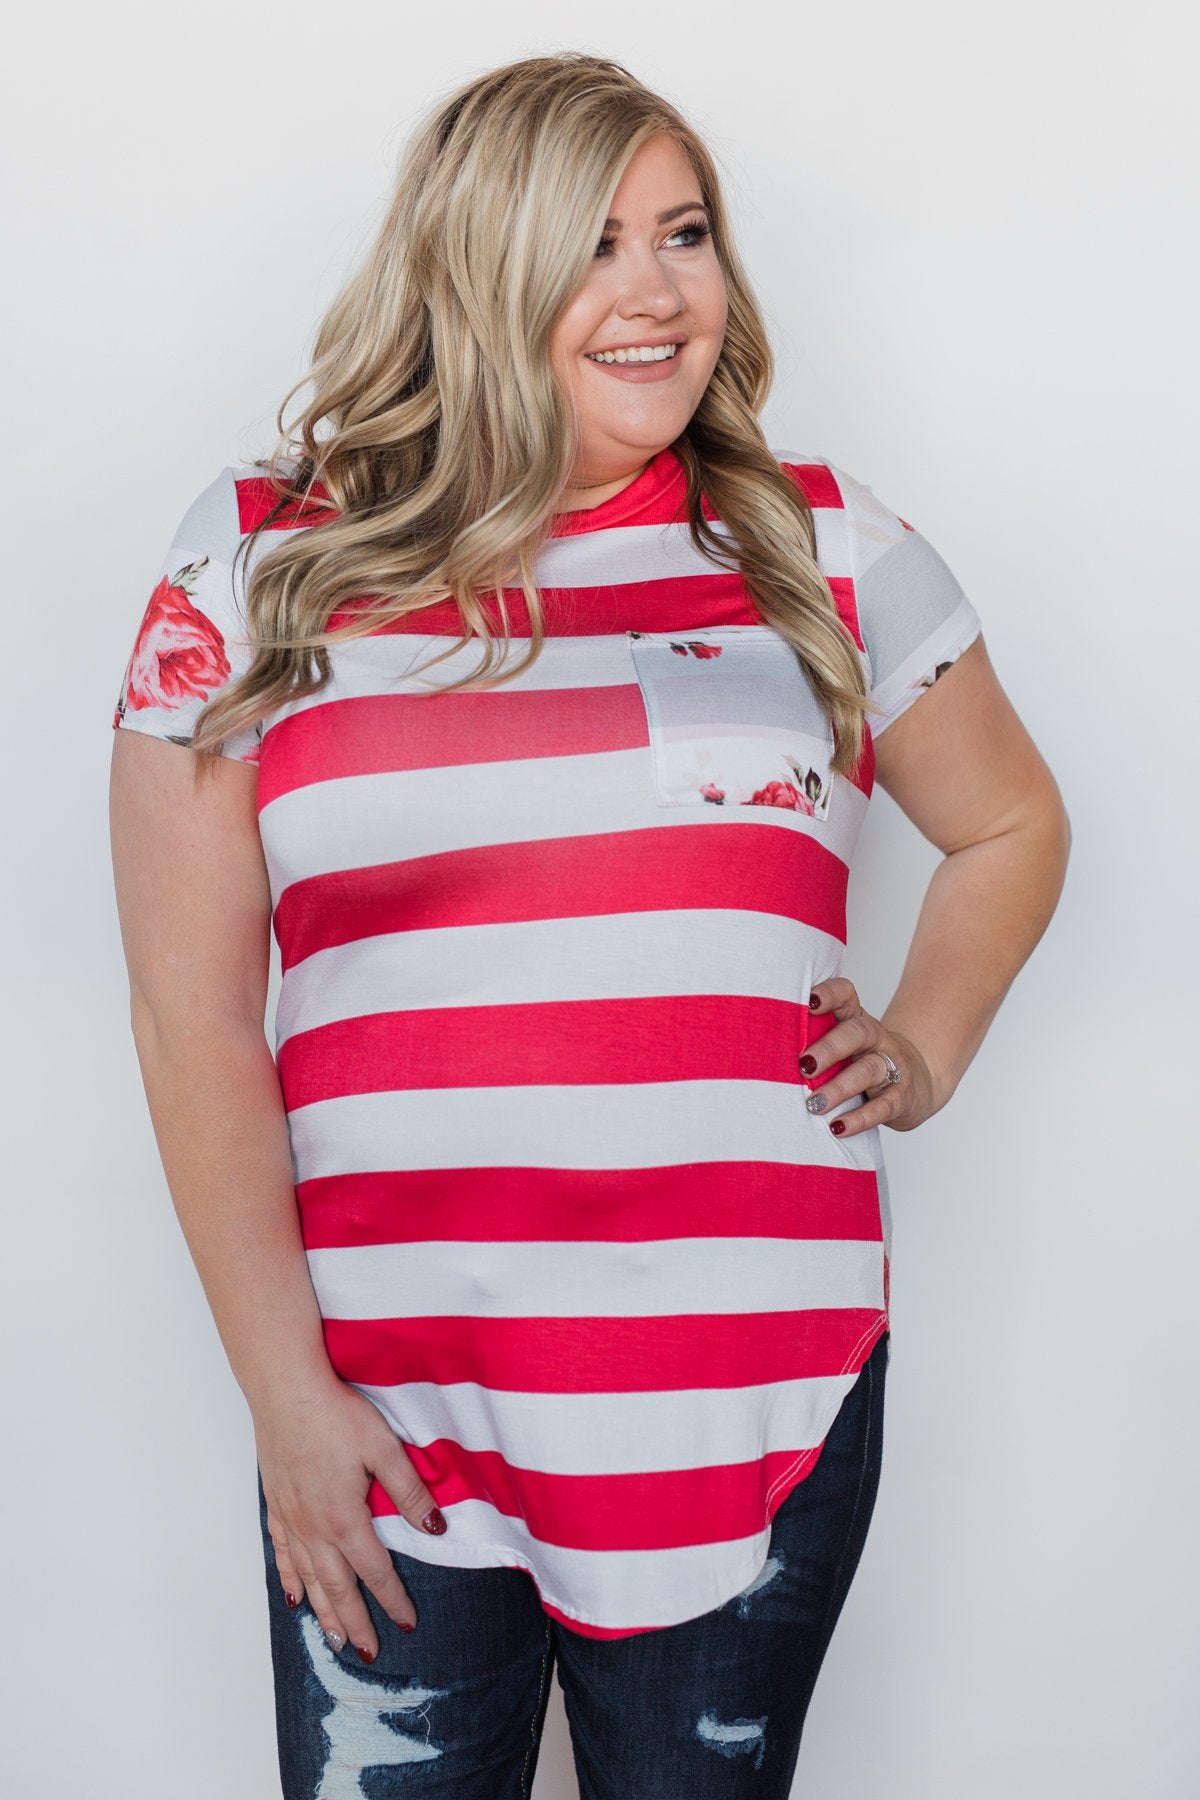 Dare to be Bold Floral & Stripes Top - Bright Strawberry